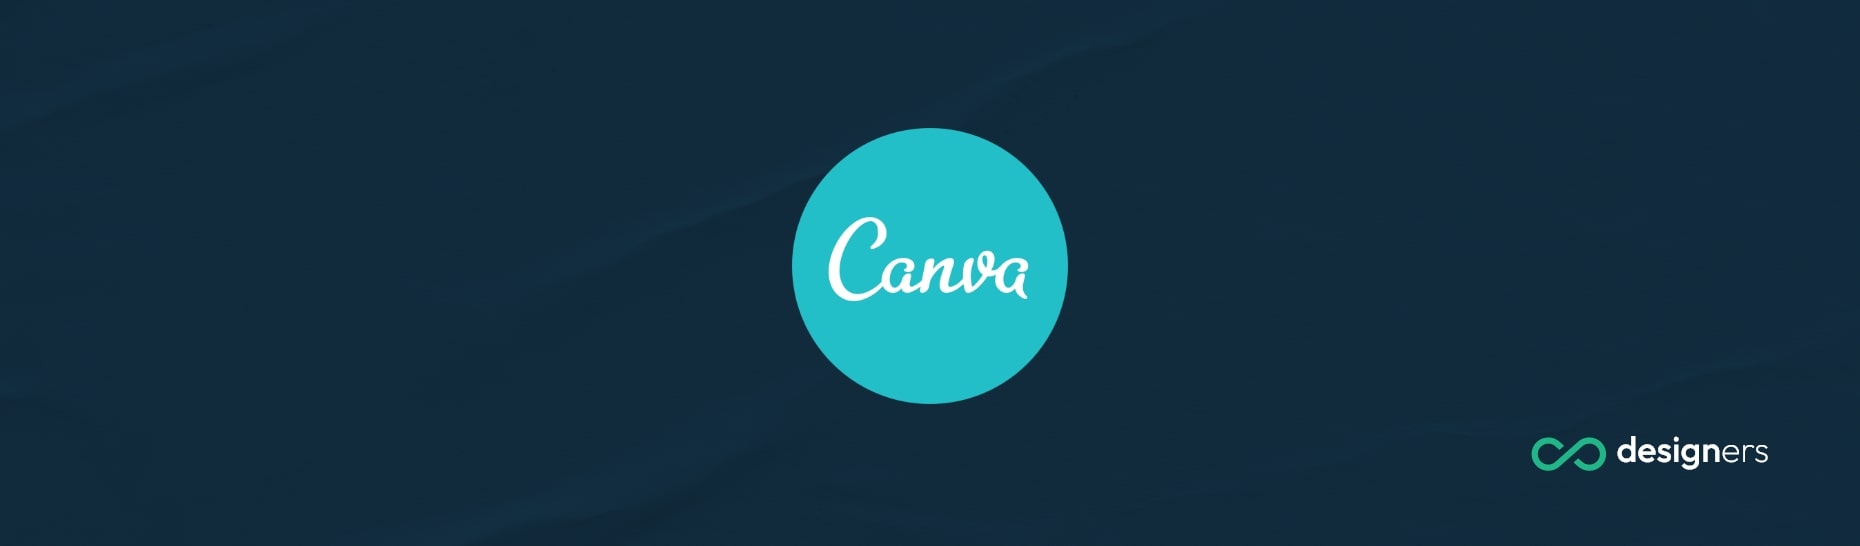 Can I use Canva designs on merchandise?